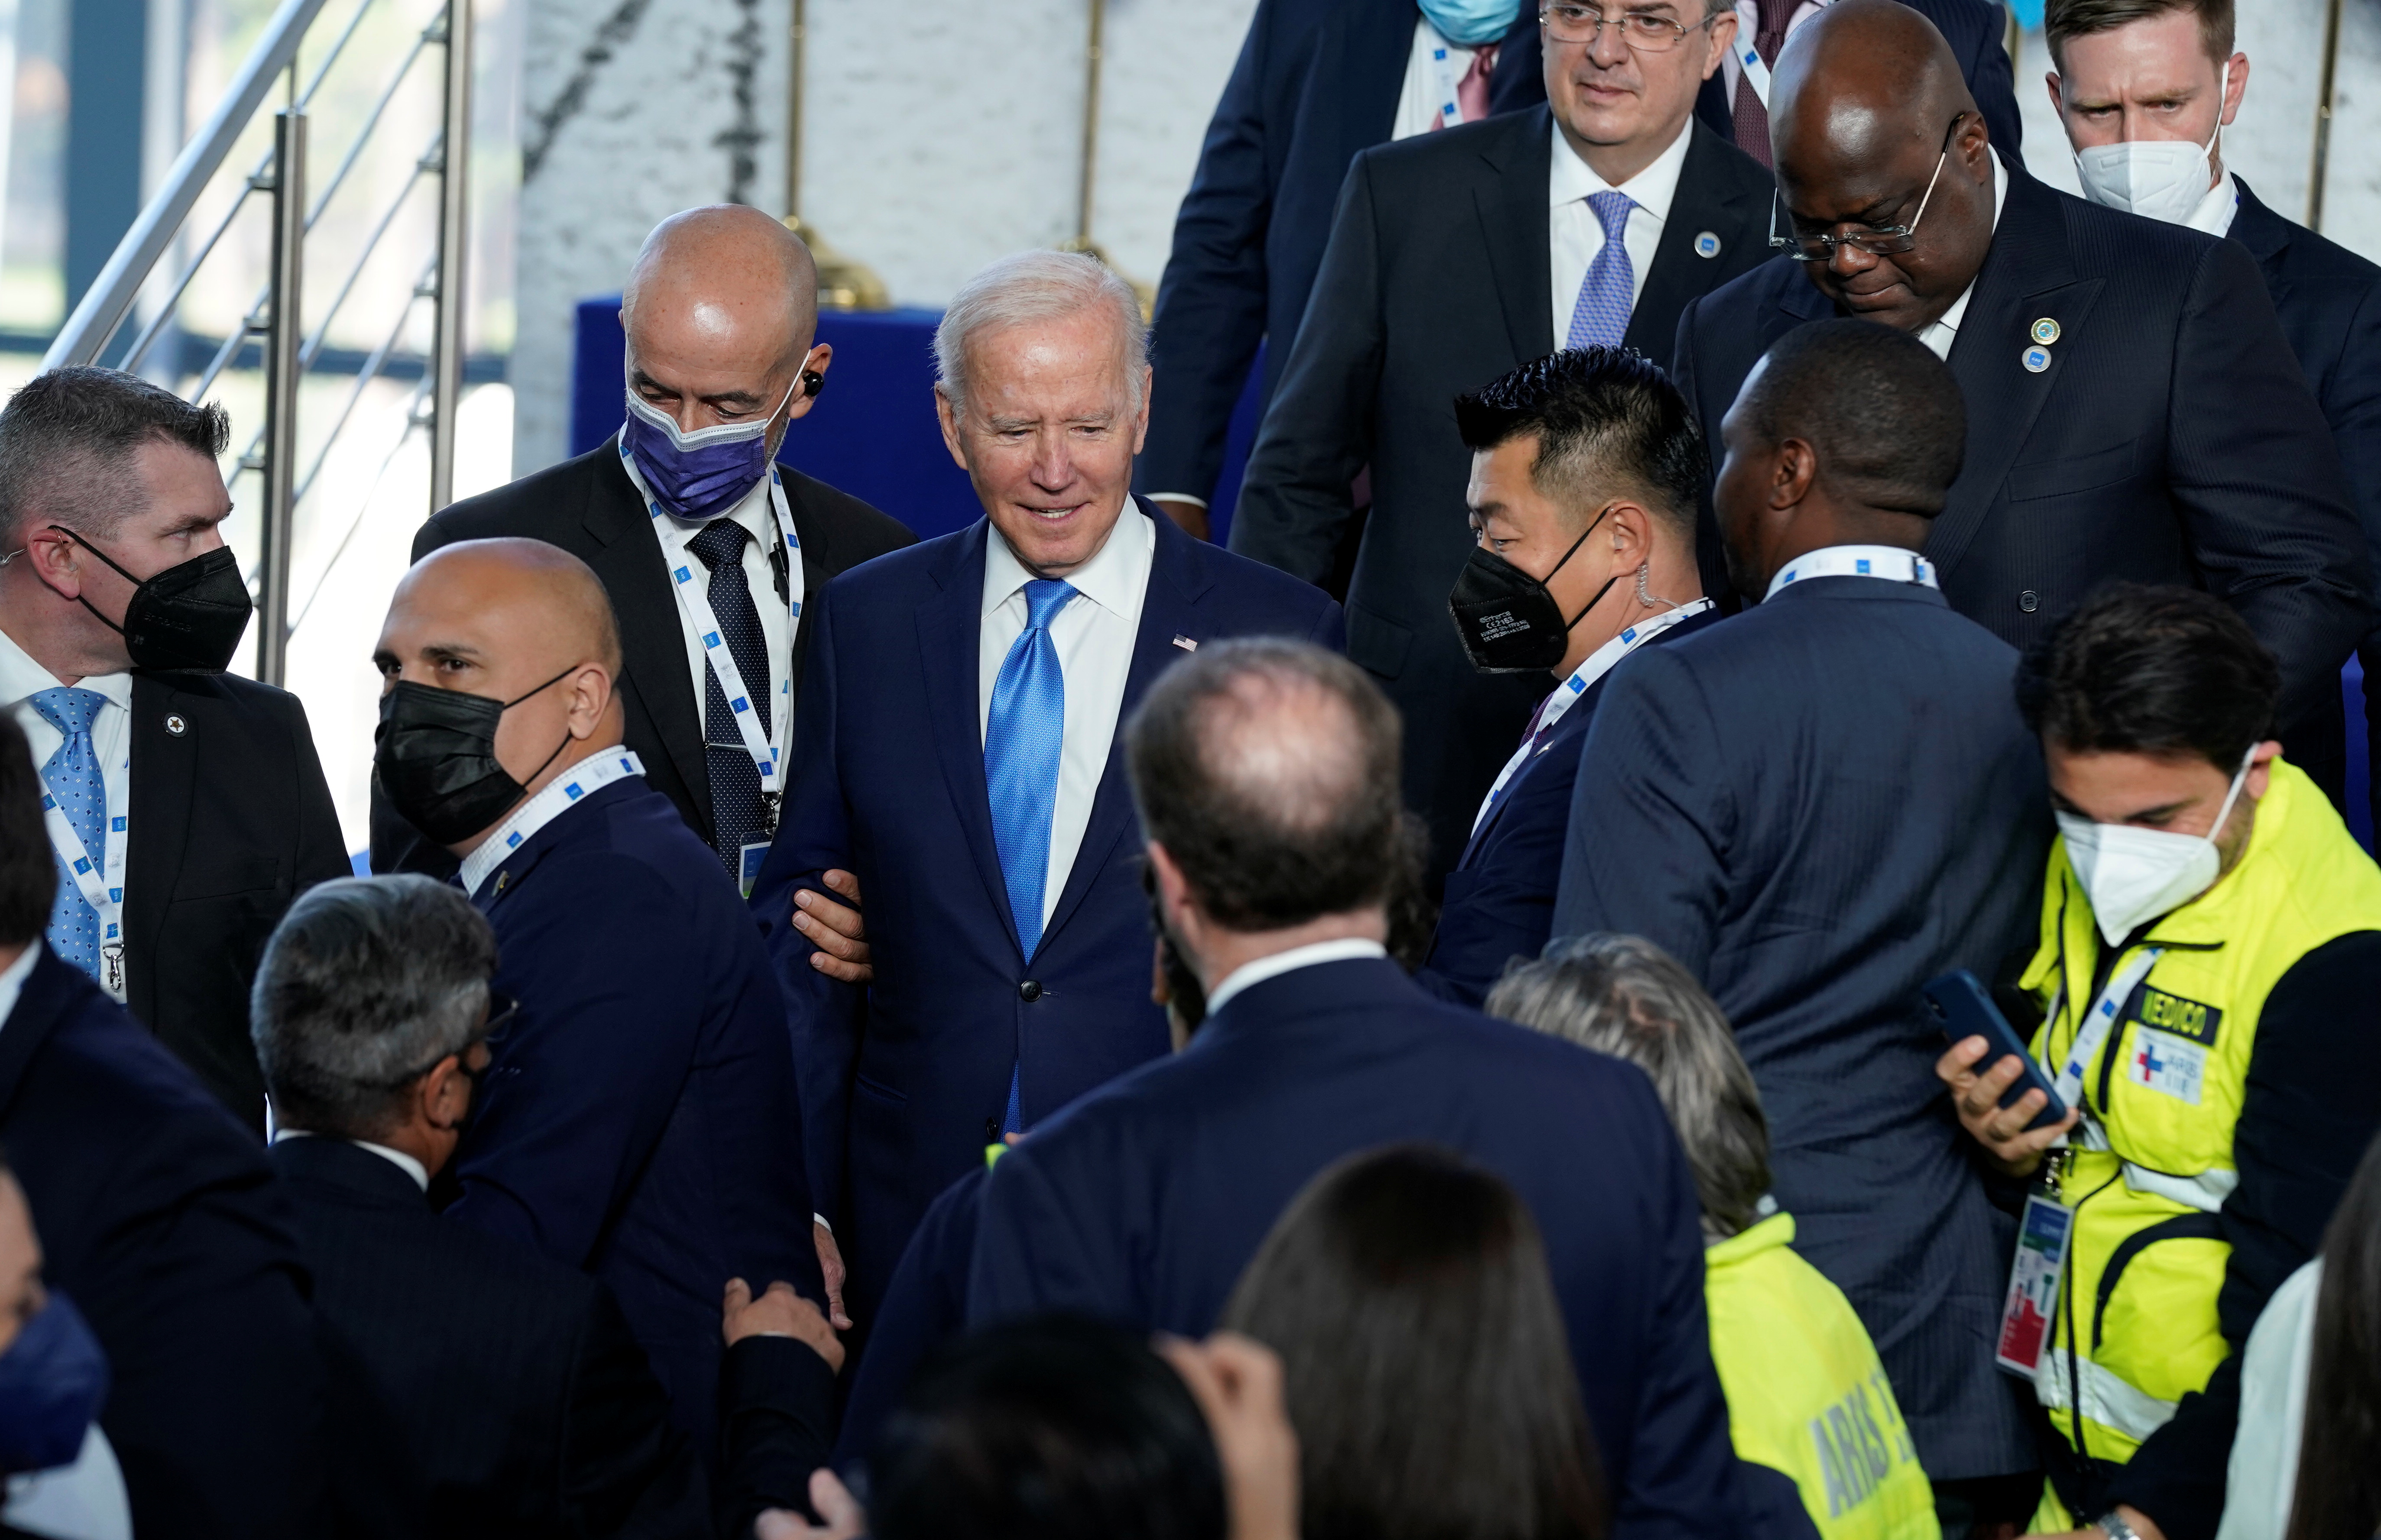 U.S. President Joe Biden prepares to step off the podium after a group photo at the G20 summit in Rome, Italy October 30, 2021. Evan Vucci/Pool via REUTERS